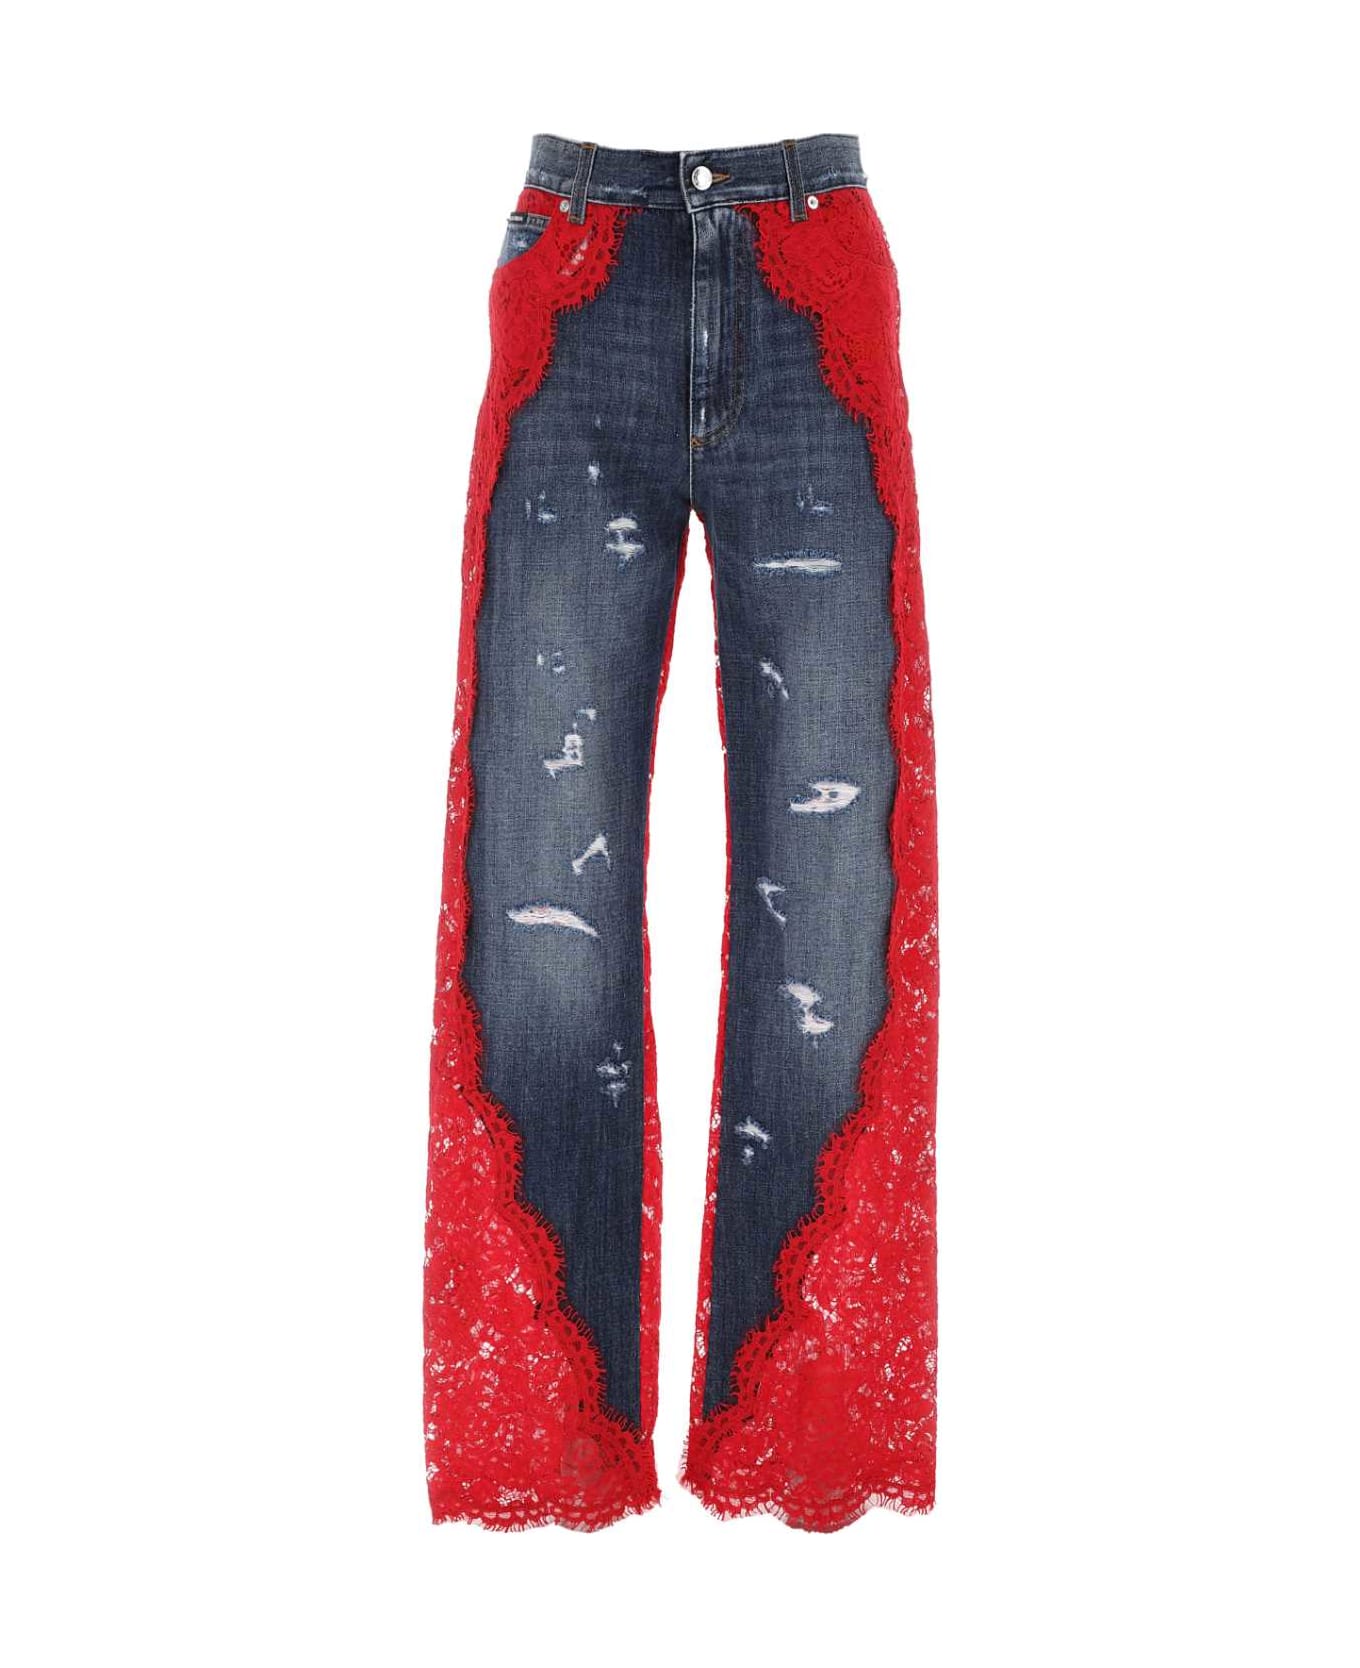 Dolce & Gabbana Two-tone Denim And Lace Jeans - Multicolor